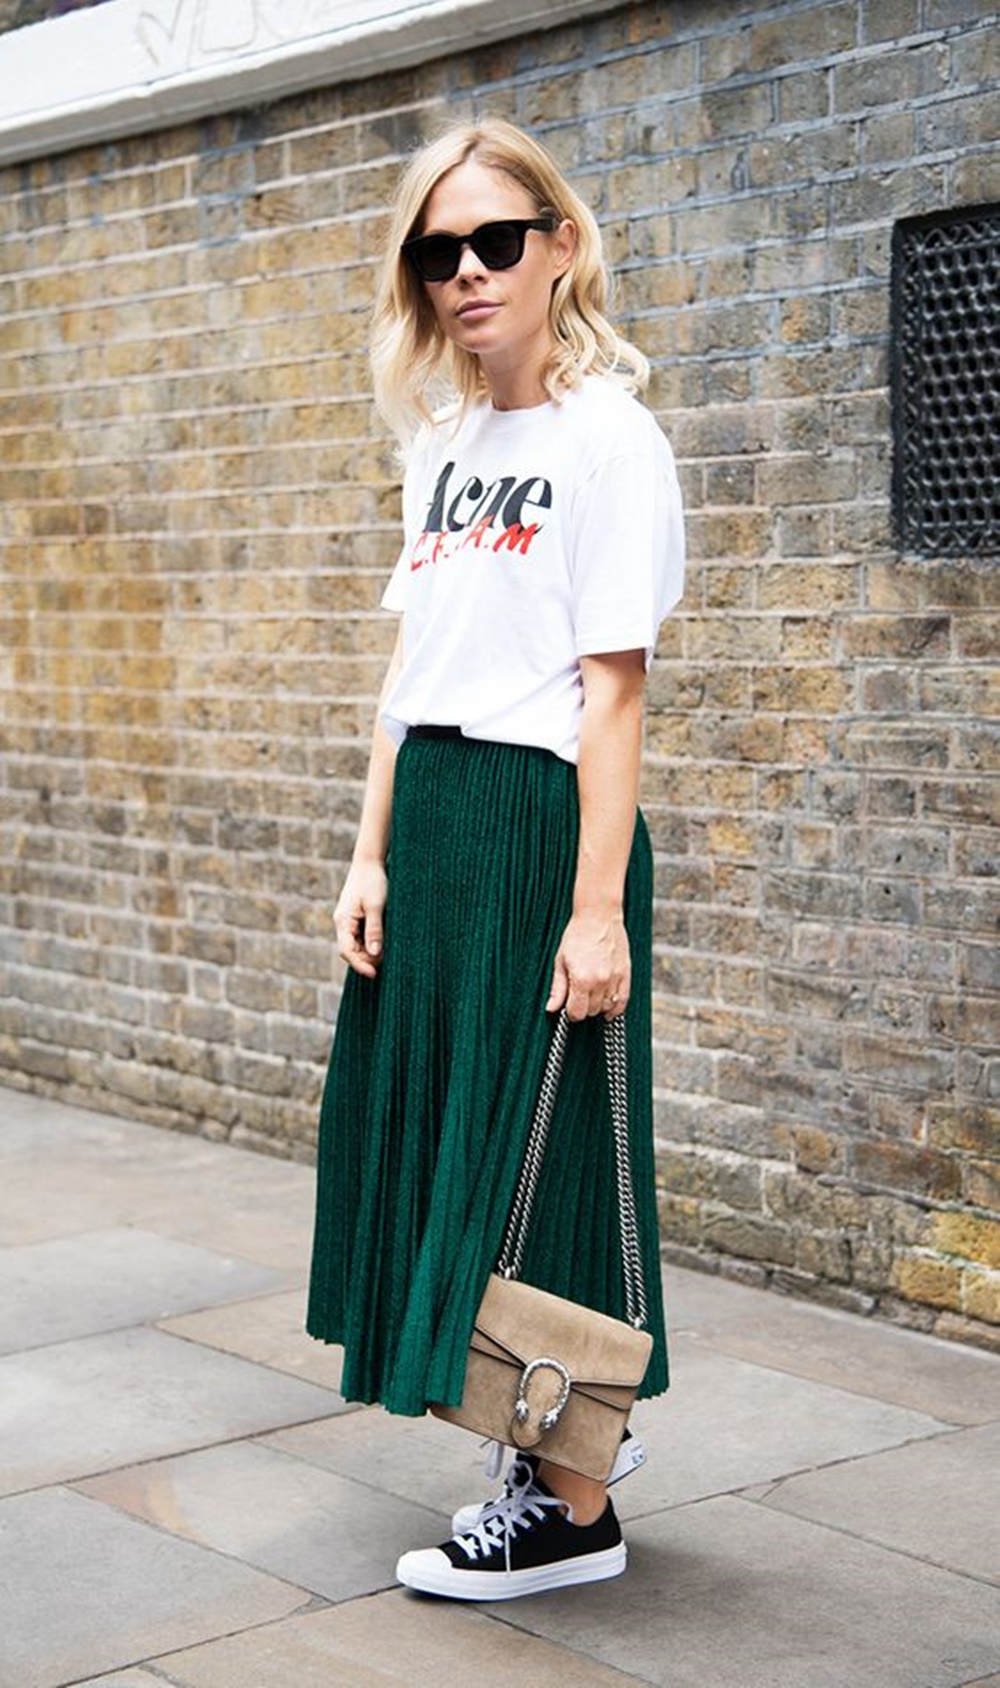 Skirt and T shirt. 1 120+ Fashion Trends and Looks for College Students - 4